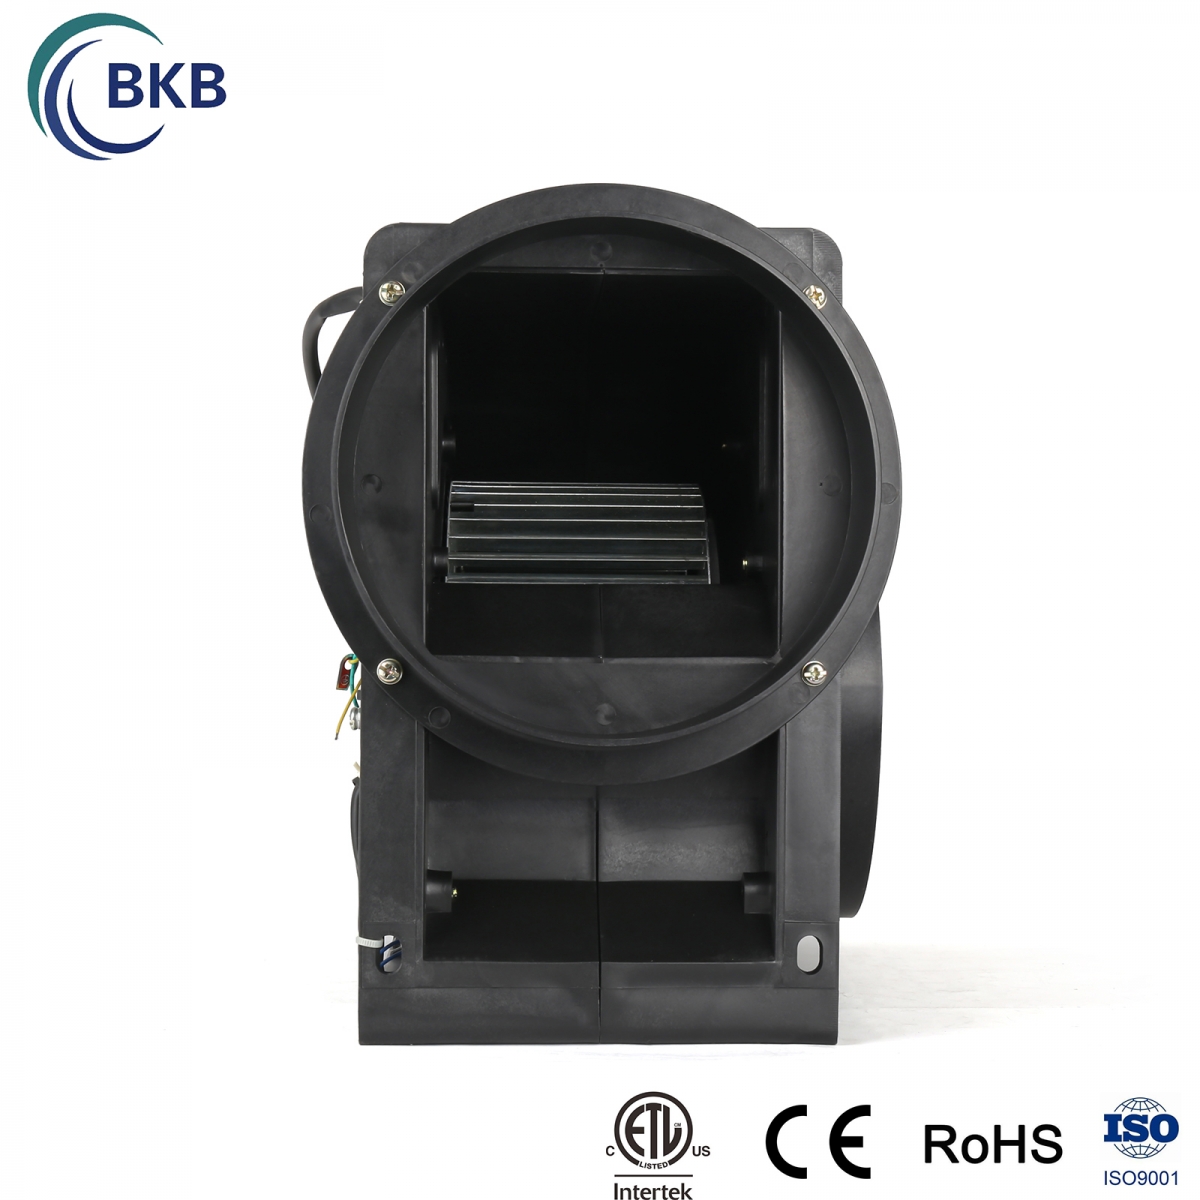 Plastic RECTANGLE centrifugal fan φ 185 supplied by Manufacturer in China.-SUNLIGHT BLOWER,Centrifugal Fans, Inline Fans,Motors,Backward curved centrifugal fans ,Forward curved centrifugal fans ,inlet fans, EC fans